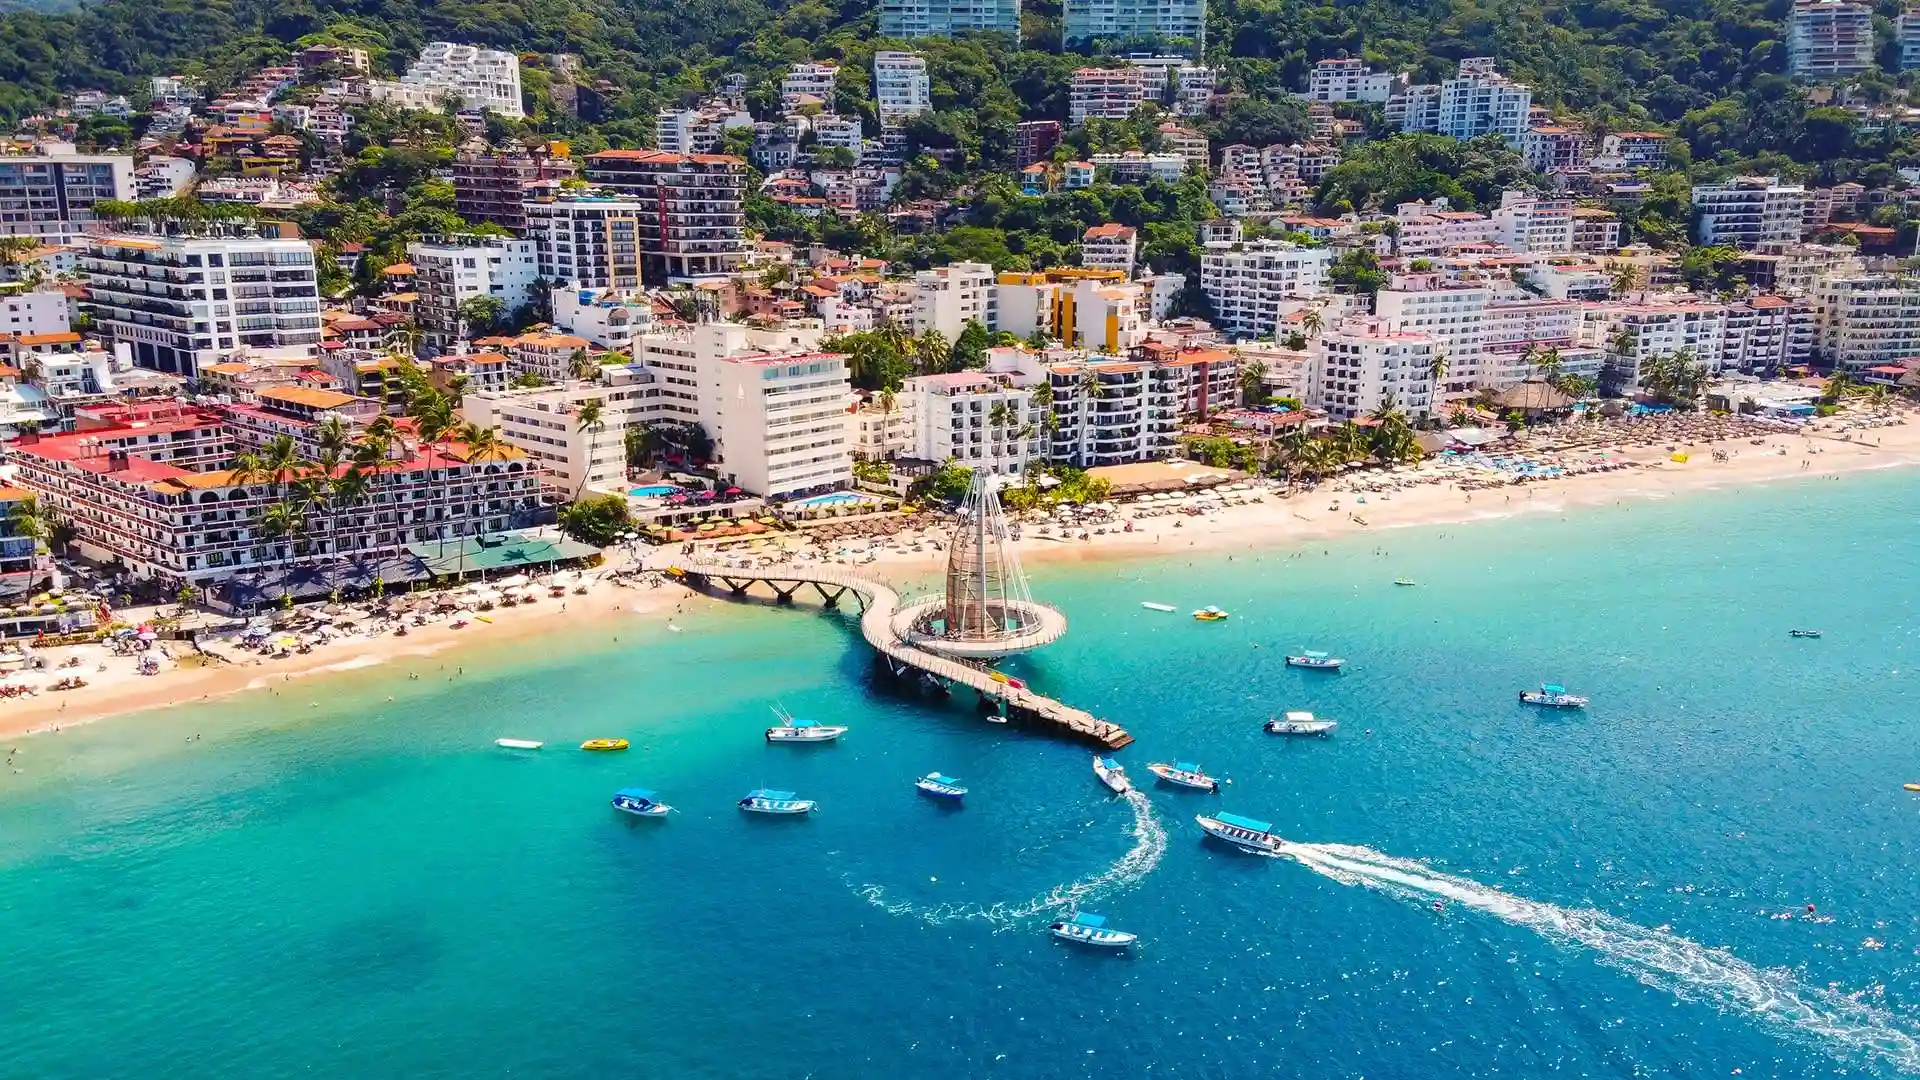 Puerto Vallarta Sets All-Time Record For Most Visitors – Why Are Tourists Loving It?